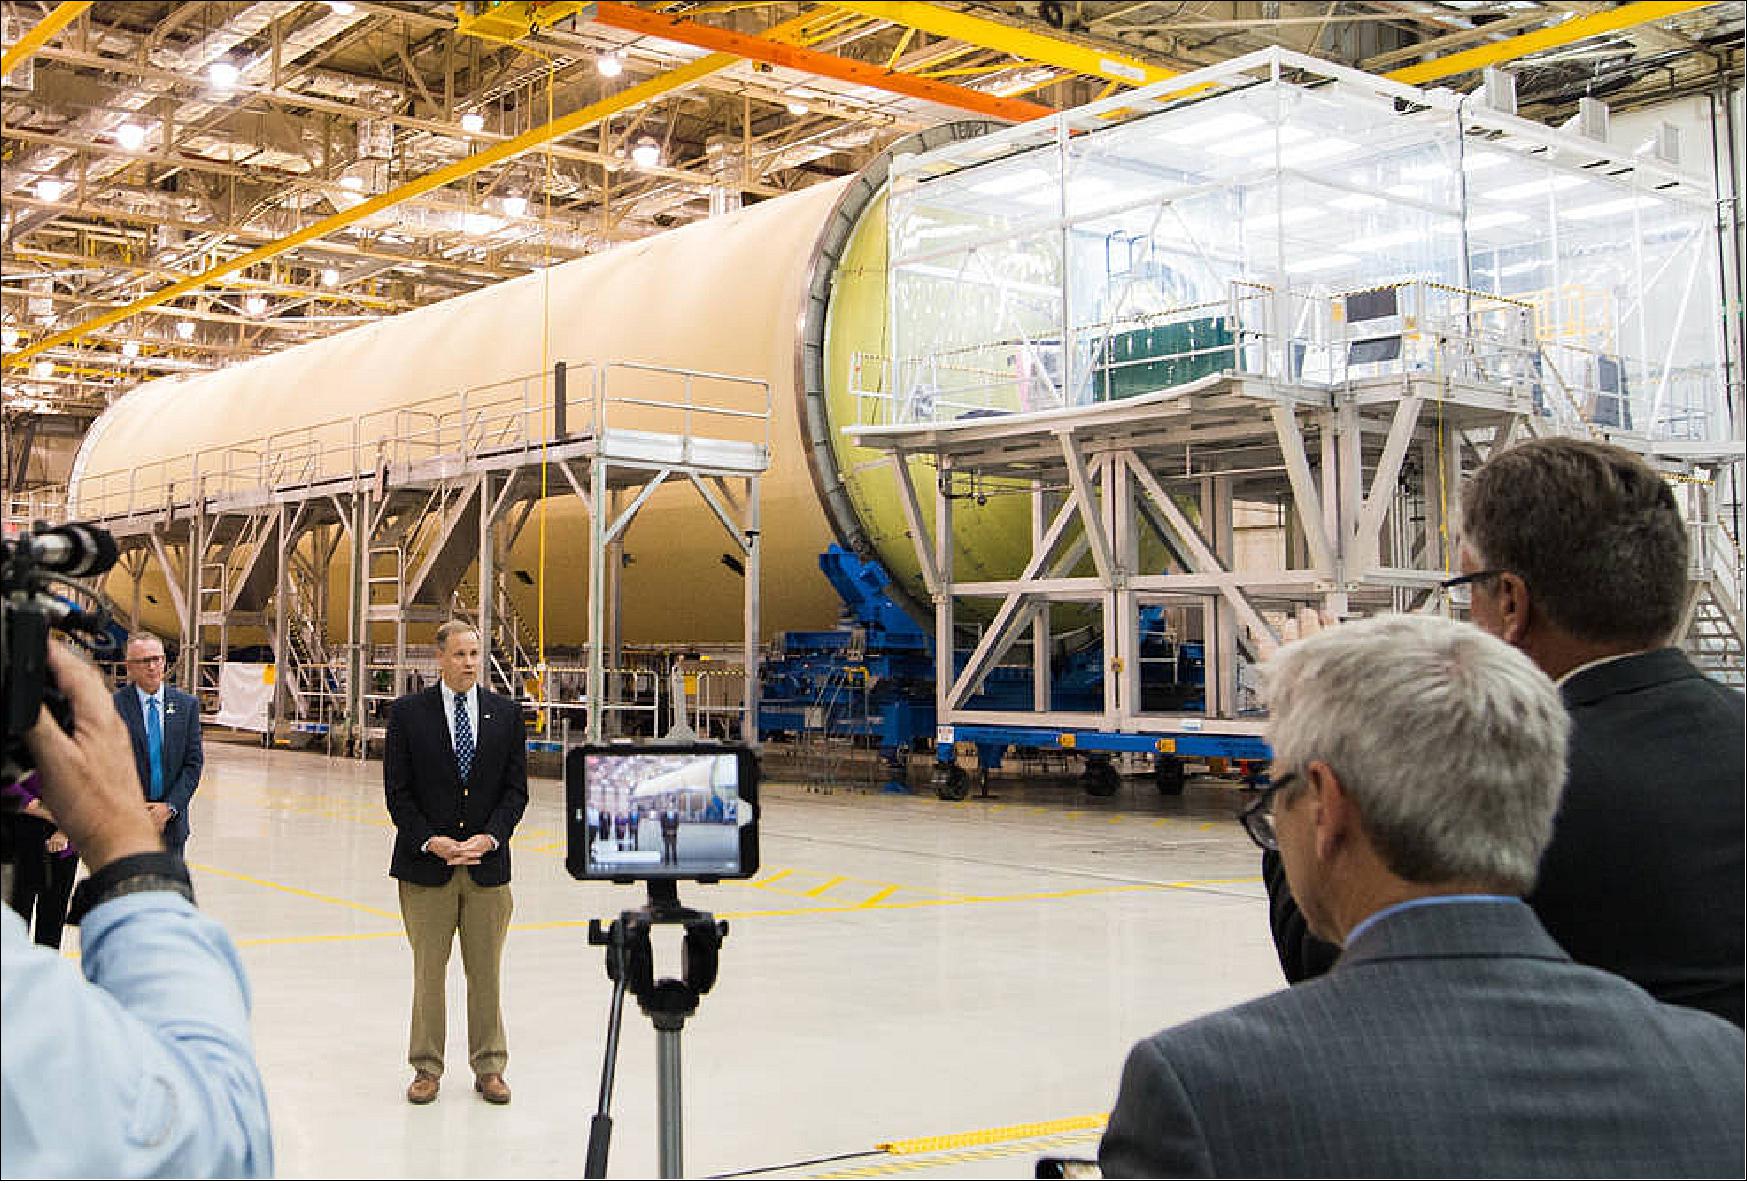 Figure 46: NASA Administrator Jim Bridenstine speaks with members of the media in front of the massive liquid hydrogen tank, which comprises almost two-thirds of the core stage and holds 537,000 gallons (2032 cm3) of liquid hydrogen cooled to minus 423º Fahrenheit (-252ºC). Innovative processes are part of core stage manufacturing including joining the thickest pieces of aluminum ever with self-reacting friction stir welding. The liquid oxygen tank and liquid hydrogen tanks have the thickest joints ever made with self-reacting friction stir welding (image credit: NASA, Jude Guidry)